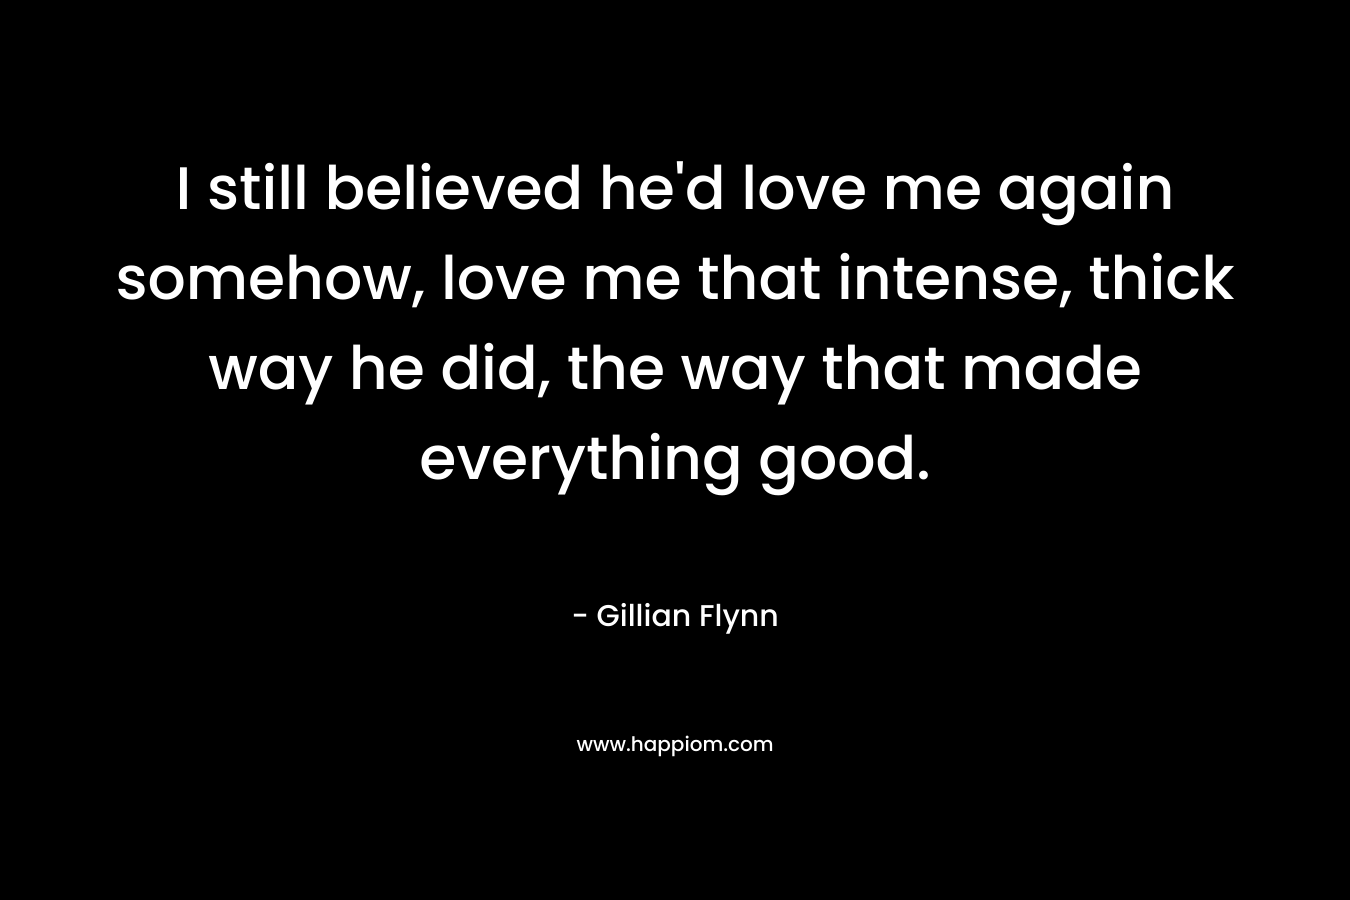 I still believed he'd love me again somehow, love me that intense, thick way he did, the way that made everything good.